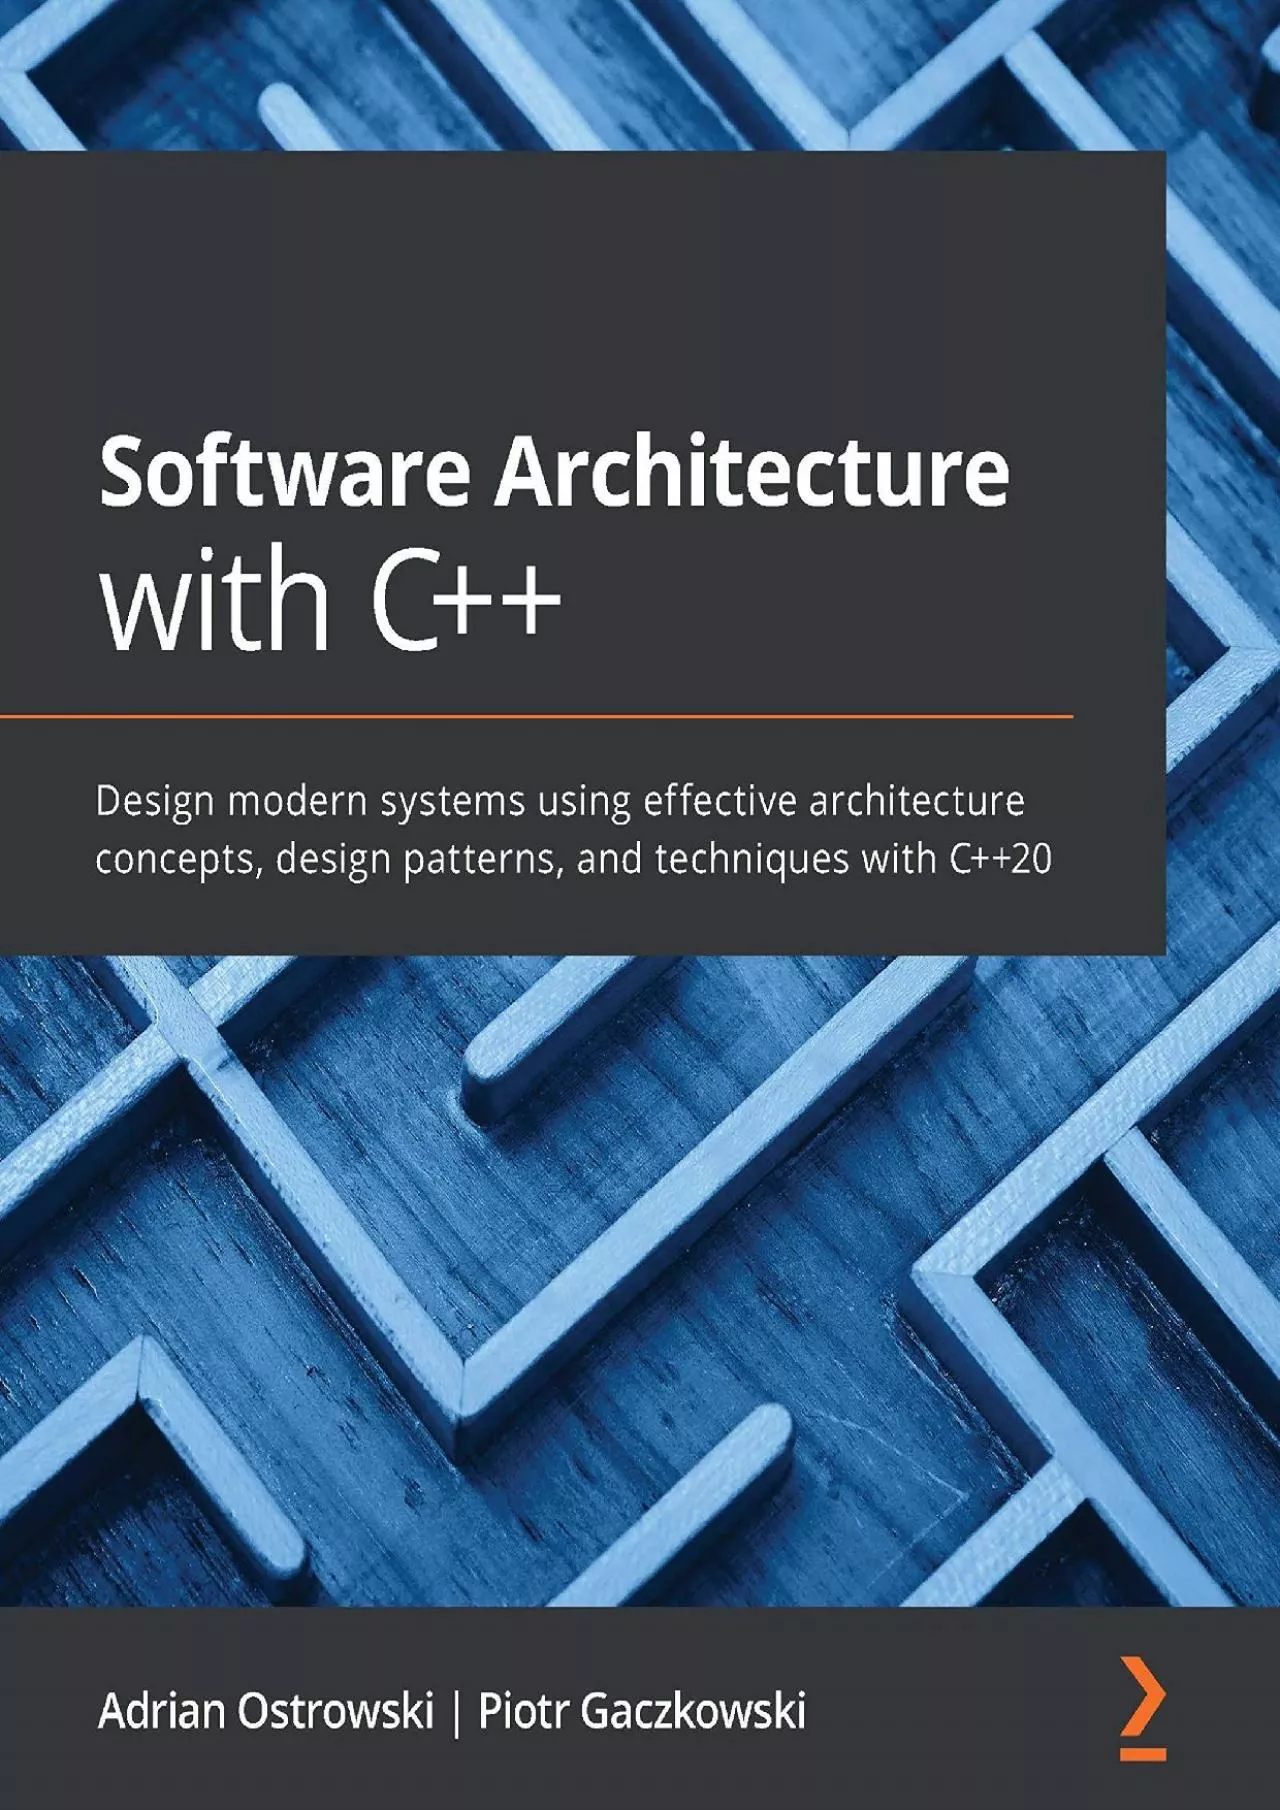 [BEST]-Software Architecture with C++: Design modern systems using effective architecture